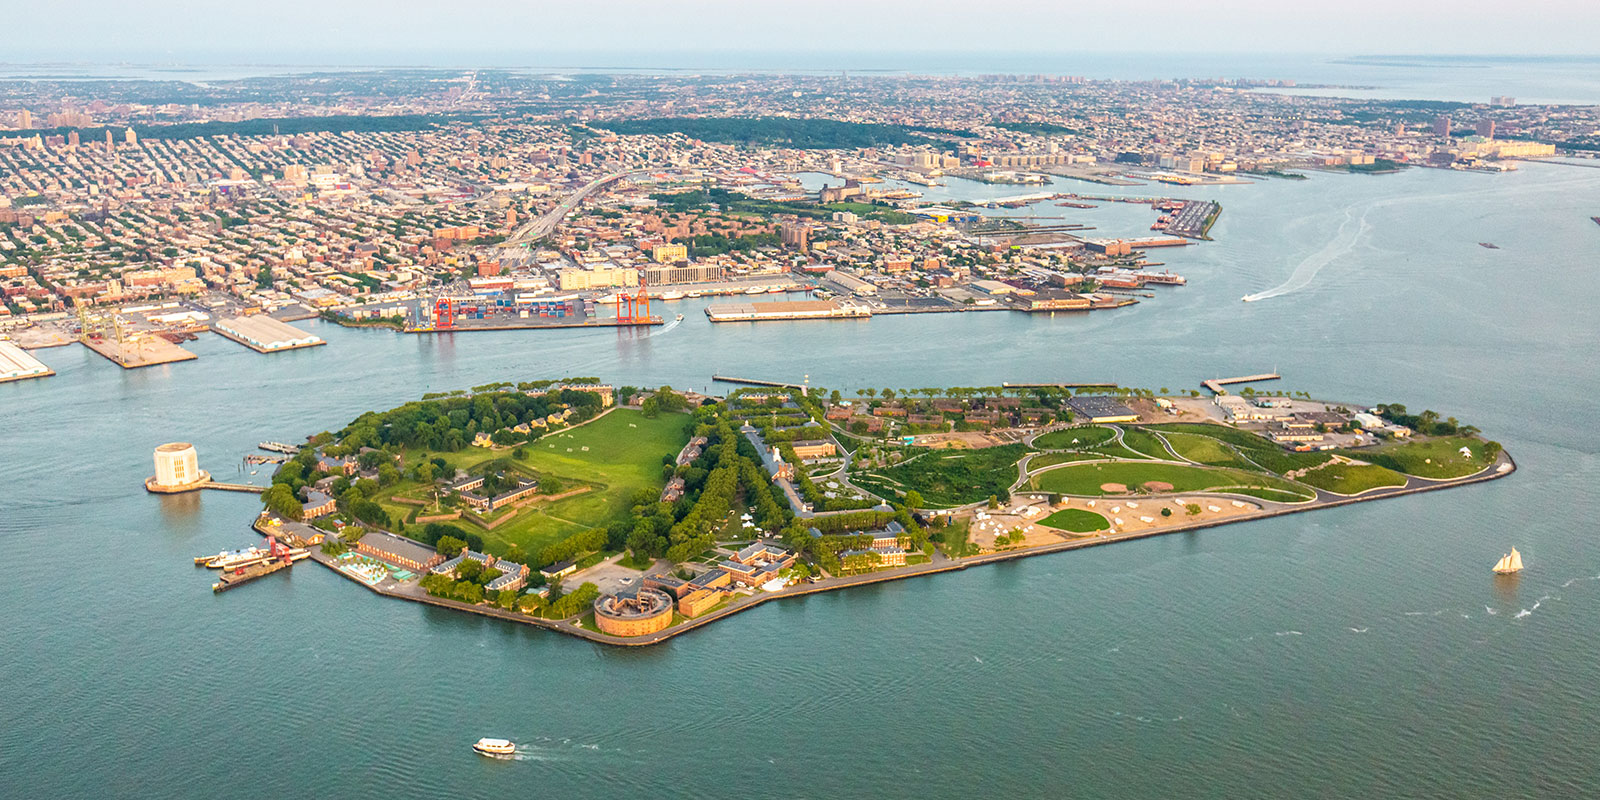 Governors Island with Red Hook, Brooklyn in the background (Ivan Mokoulin/Dreamstime)